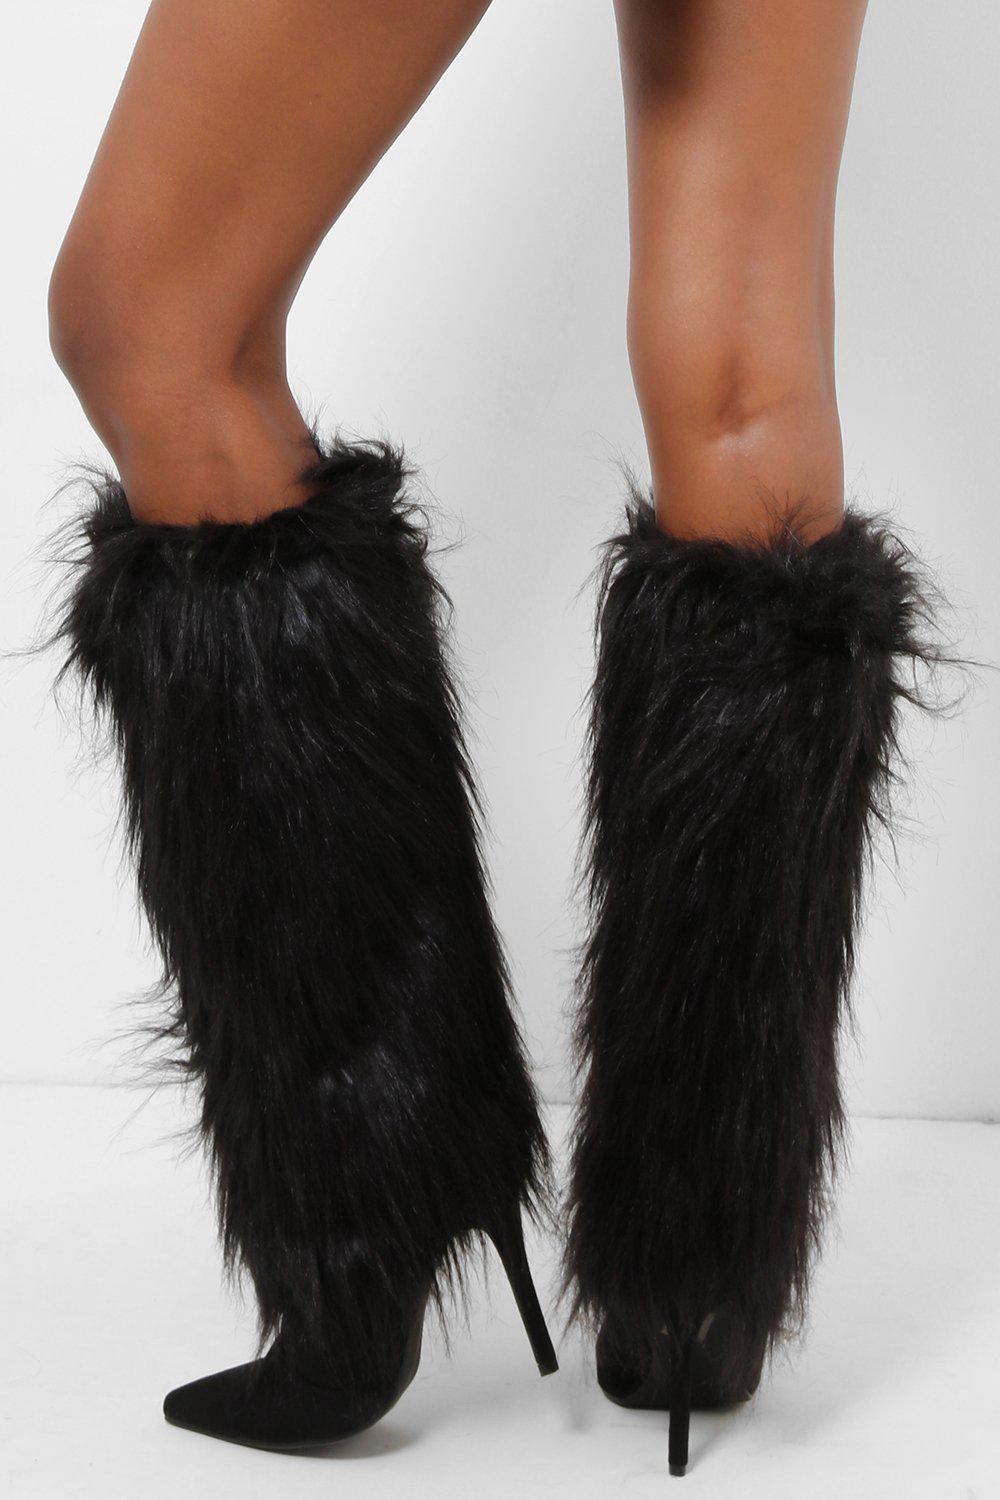 Get Black Tall Faux Fur Calf Stiletto Boots for only £5.00 exclusively ...